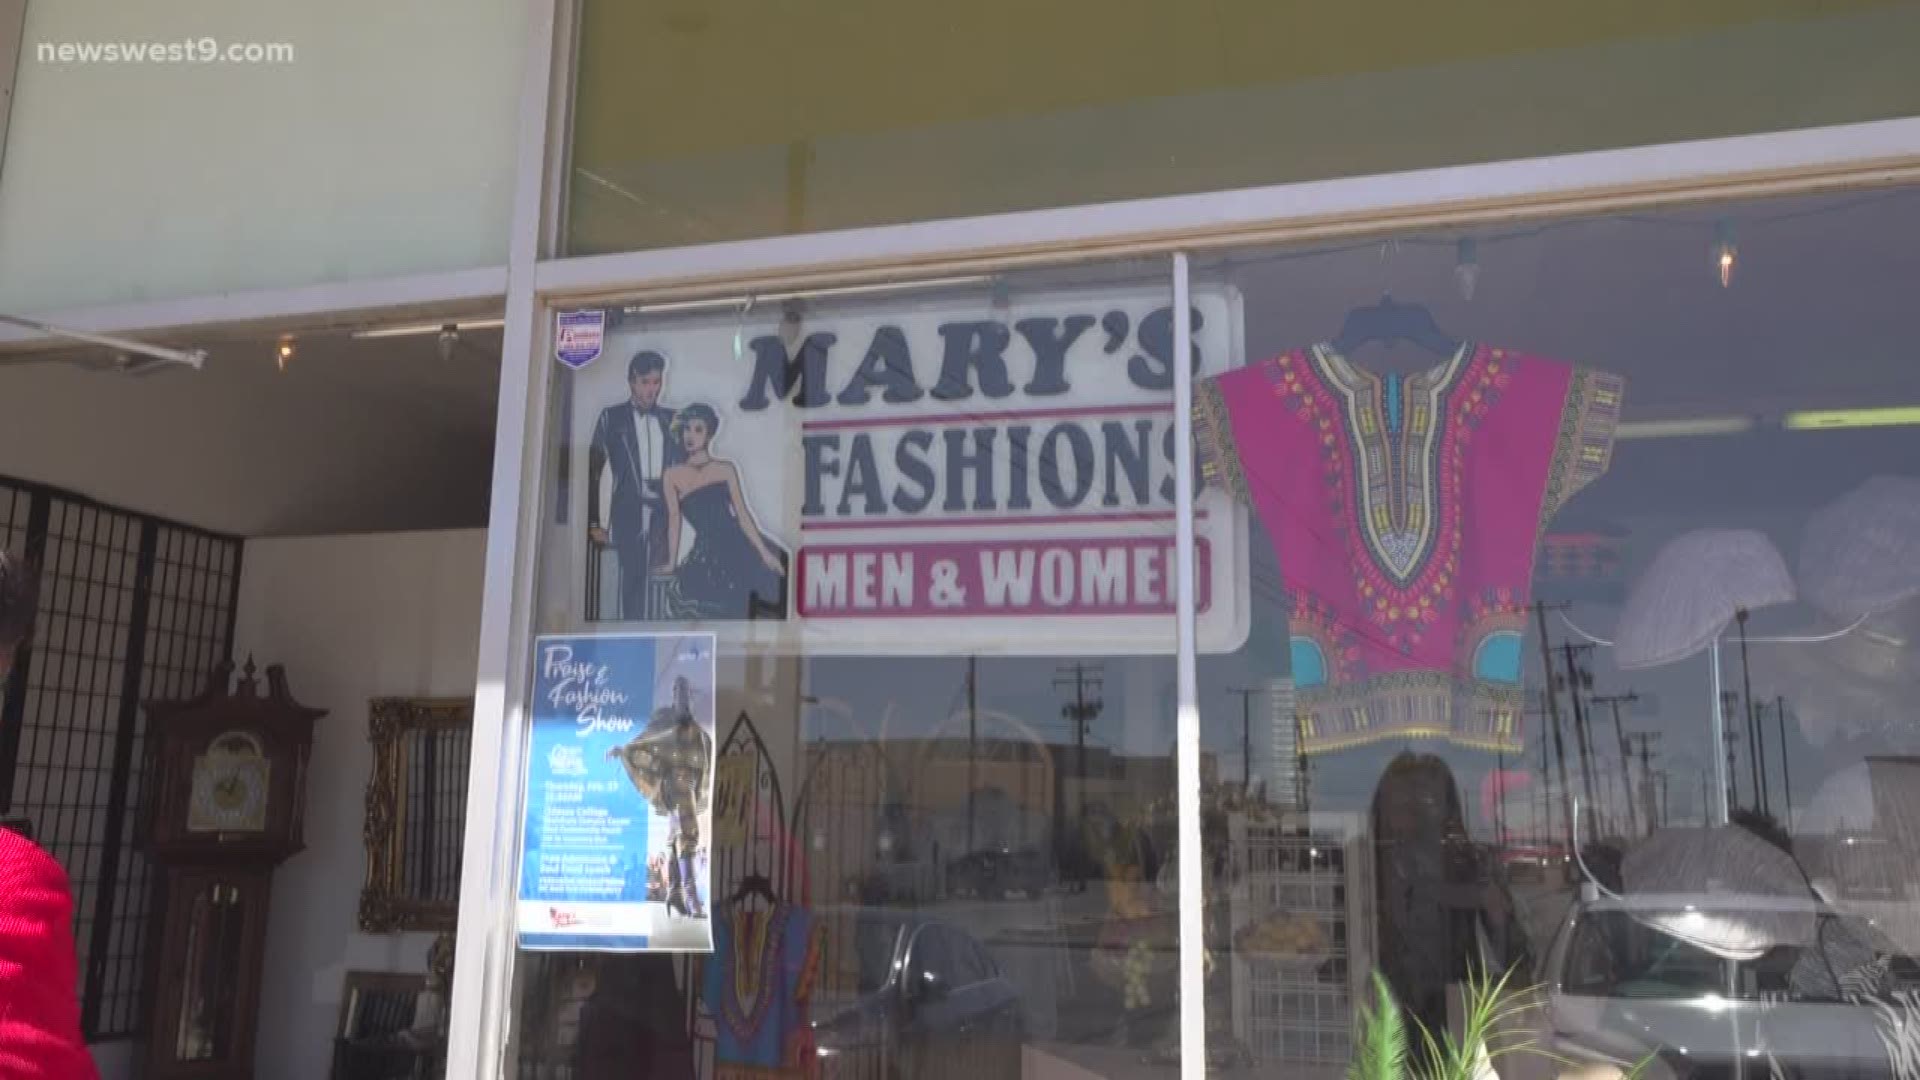 Mary's Fashions has been in Odessa for the past 20 years.